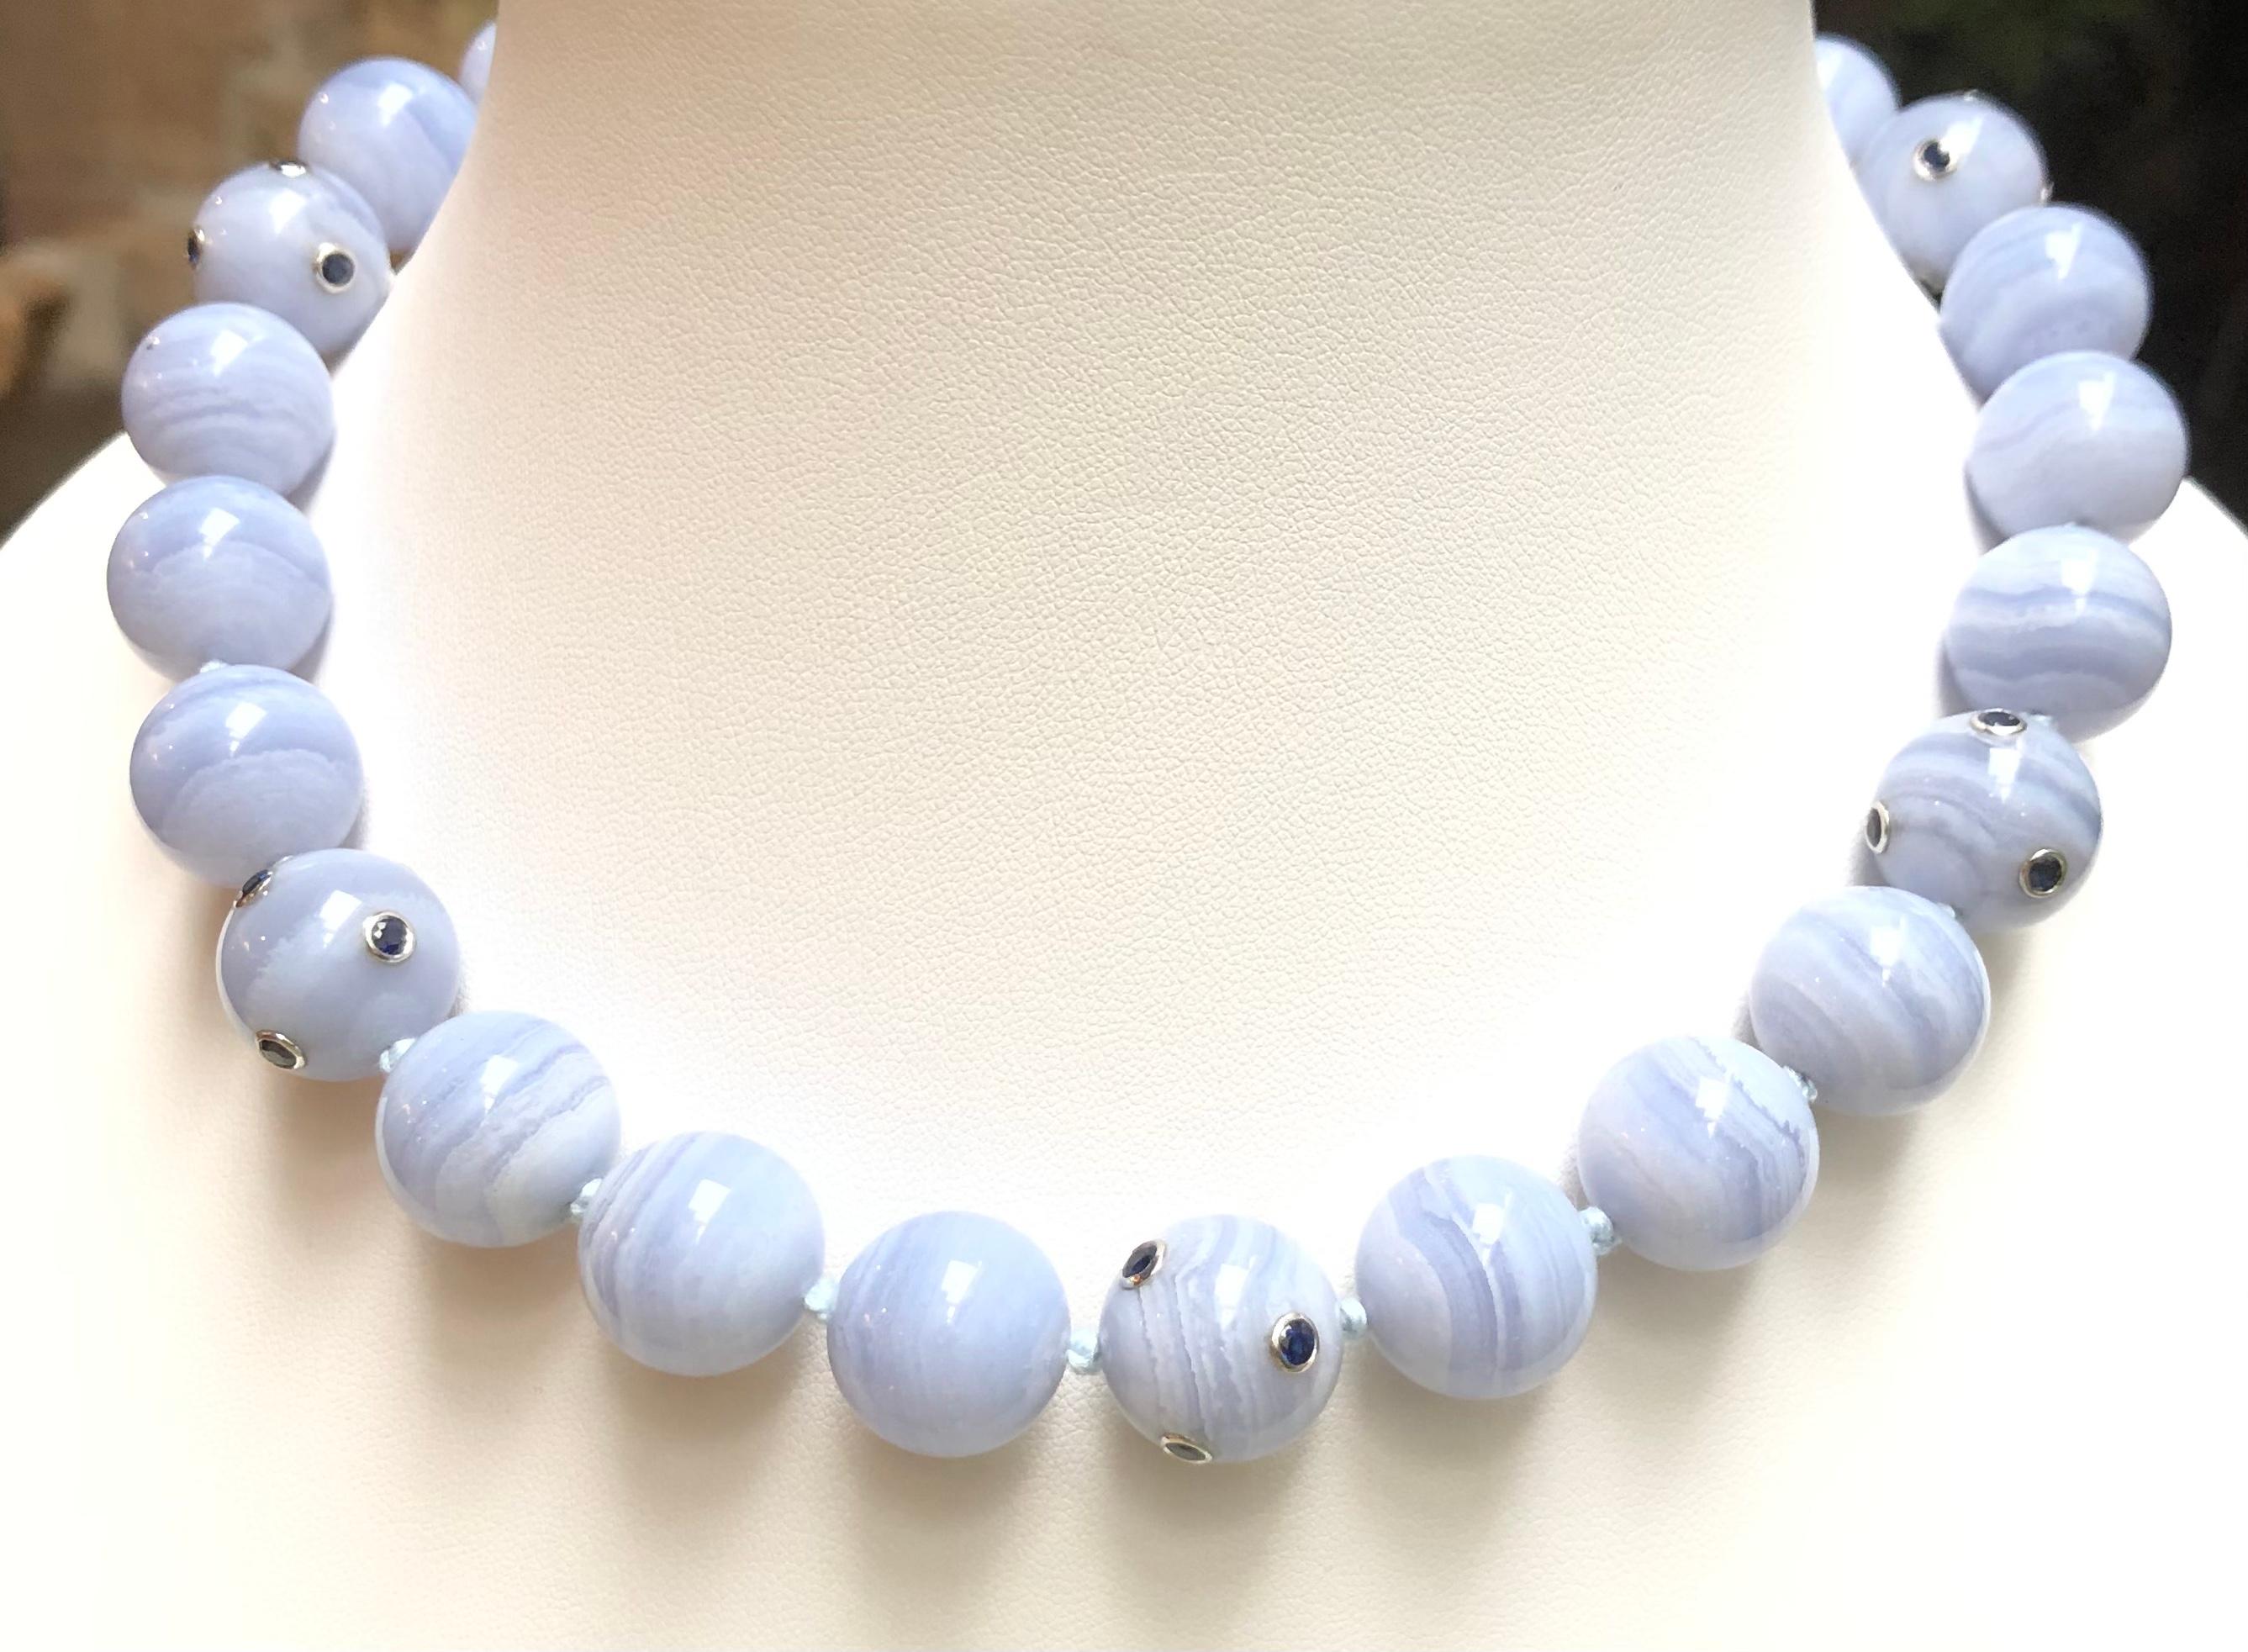 Blue Lace Agate and Blue Sapphire 3.69 carats with 18 Karat White Gold Clasp

Width:  1.4 cm 
Length: 46.0 cm
Total Weight: 155.47 grams

Blue Lace: 20.6mm / 25 pieces


